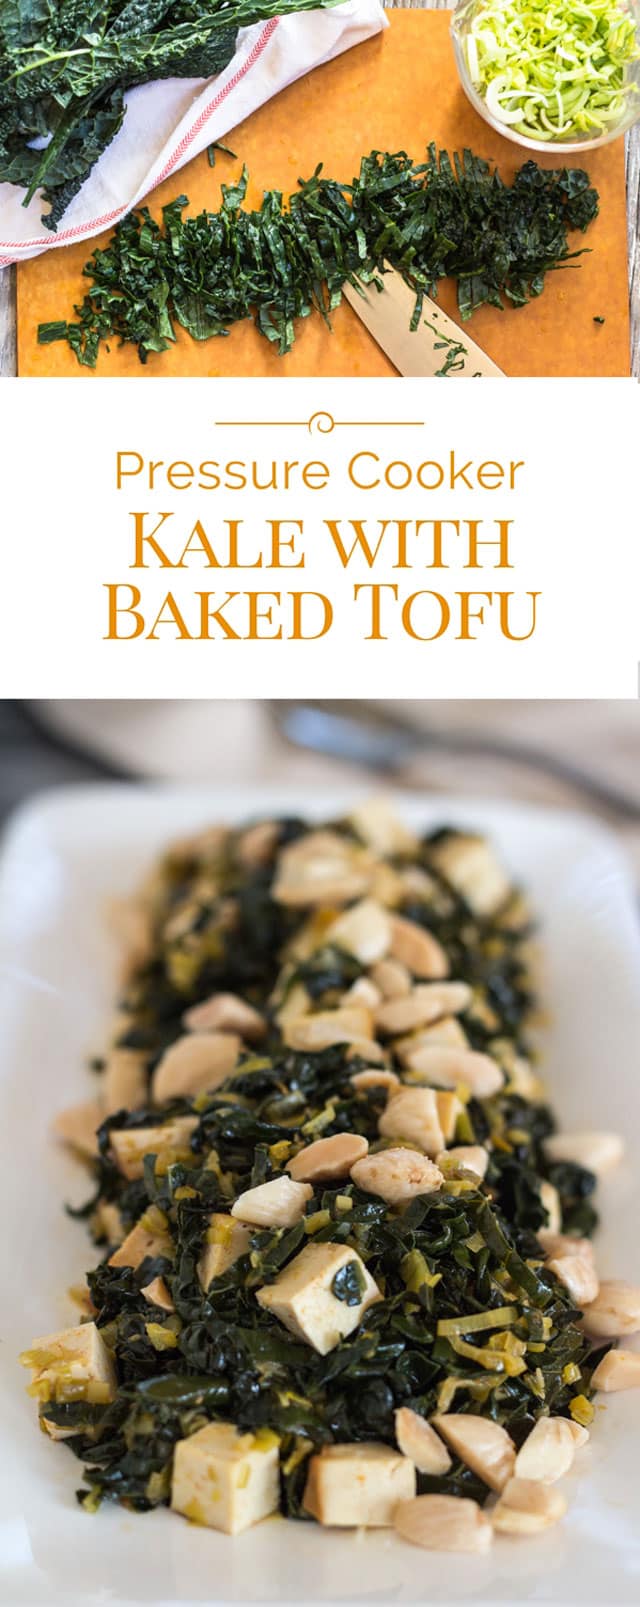 Kale with baked tofu and Spanish almonds is a healthy vegetarian pressure cooker recipe, perfect for a meatless main meal or side dish. This Instant Pot kale recipe will give you a daily dose of healthy greens. #instantpot #pressurecooker #healthyrecipe #vegetarian #tofu via @PressureCook2da